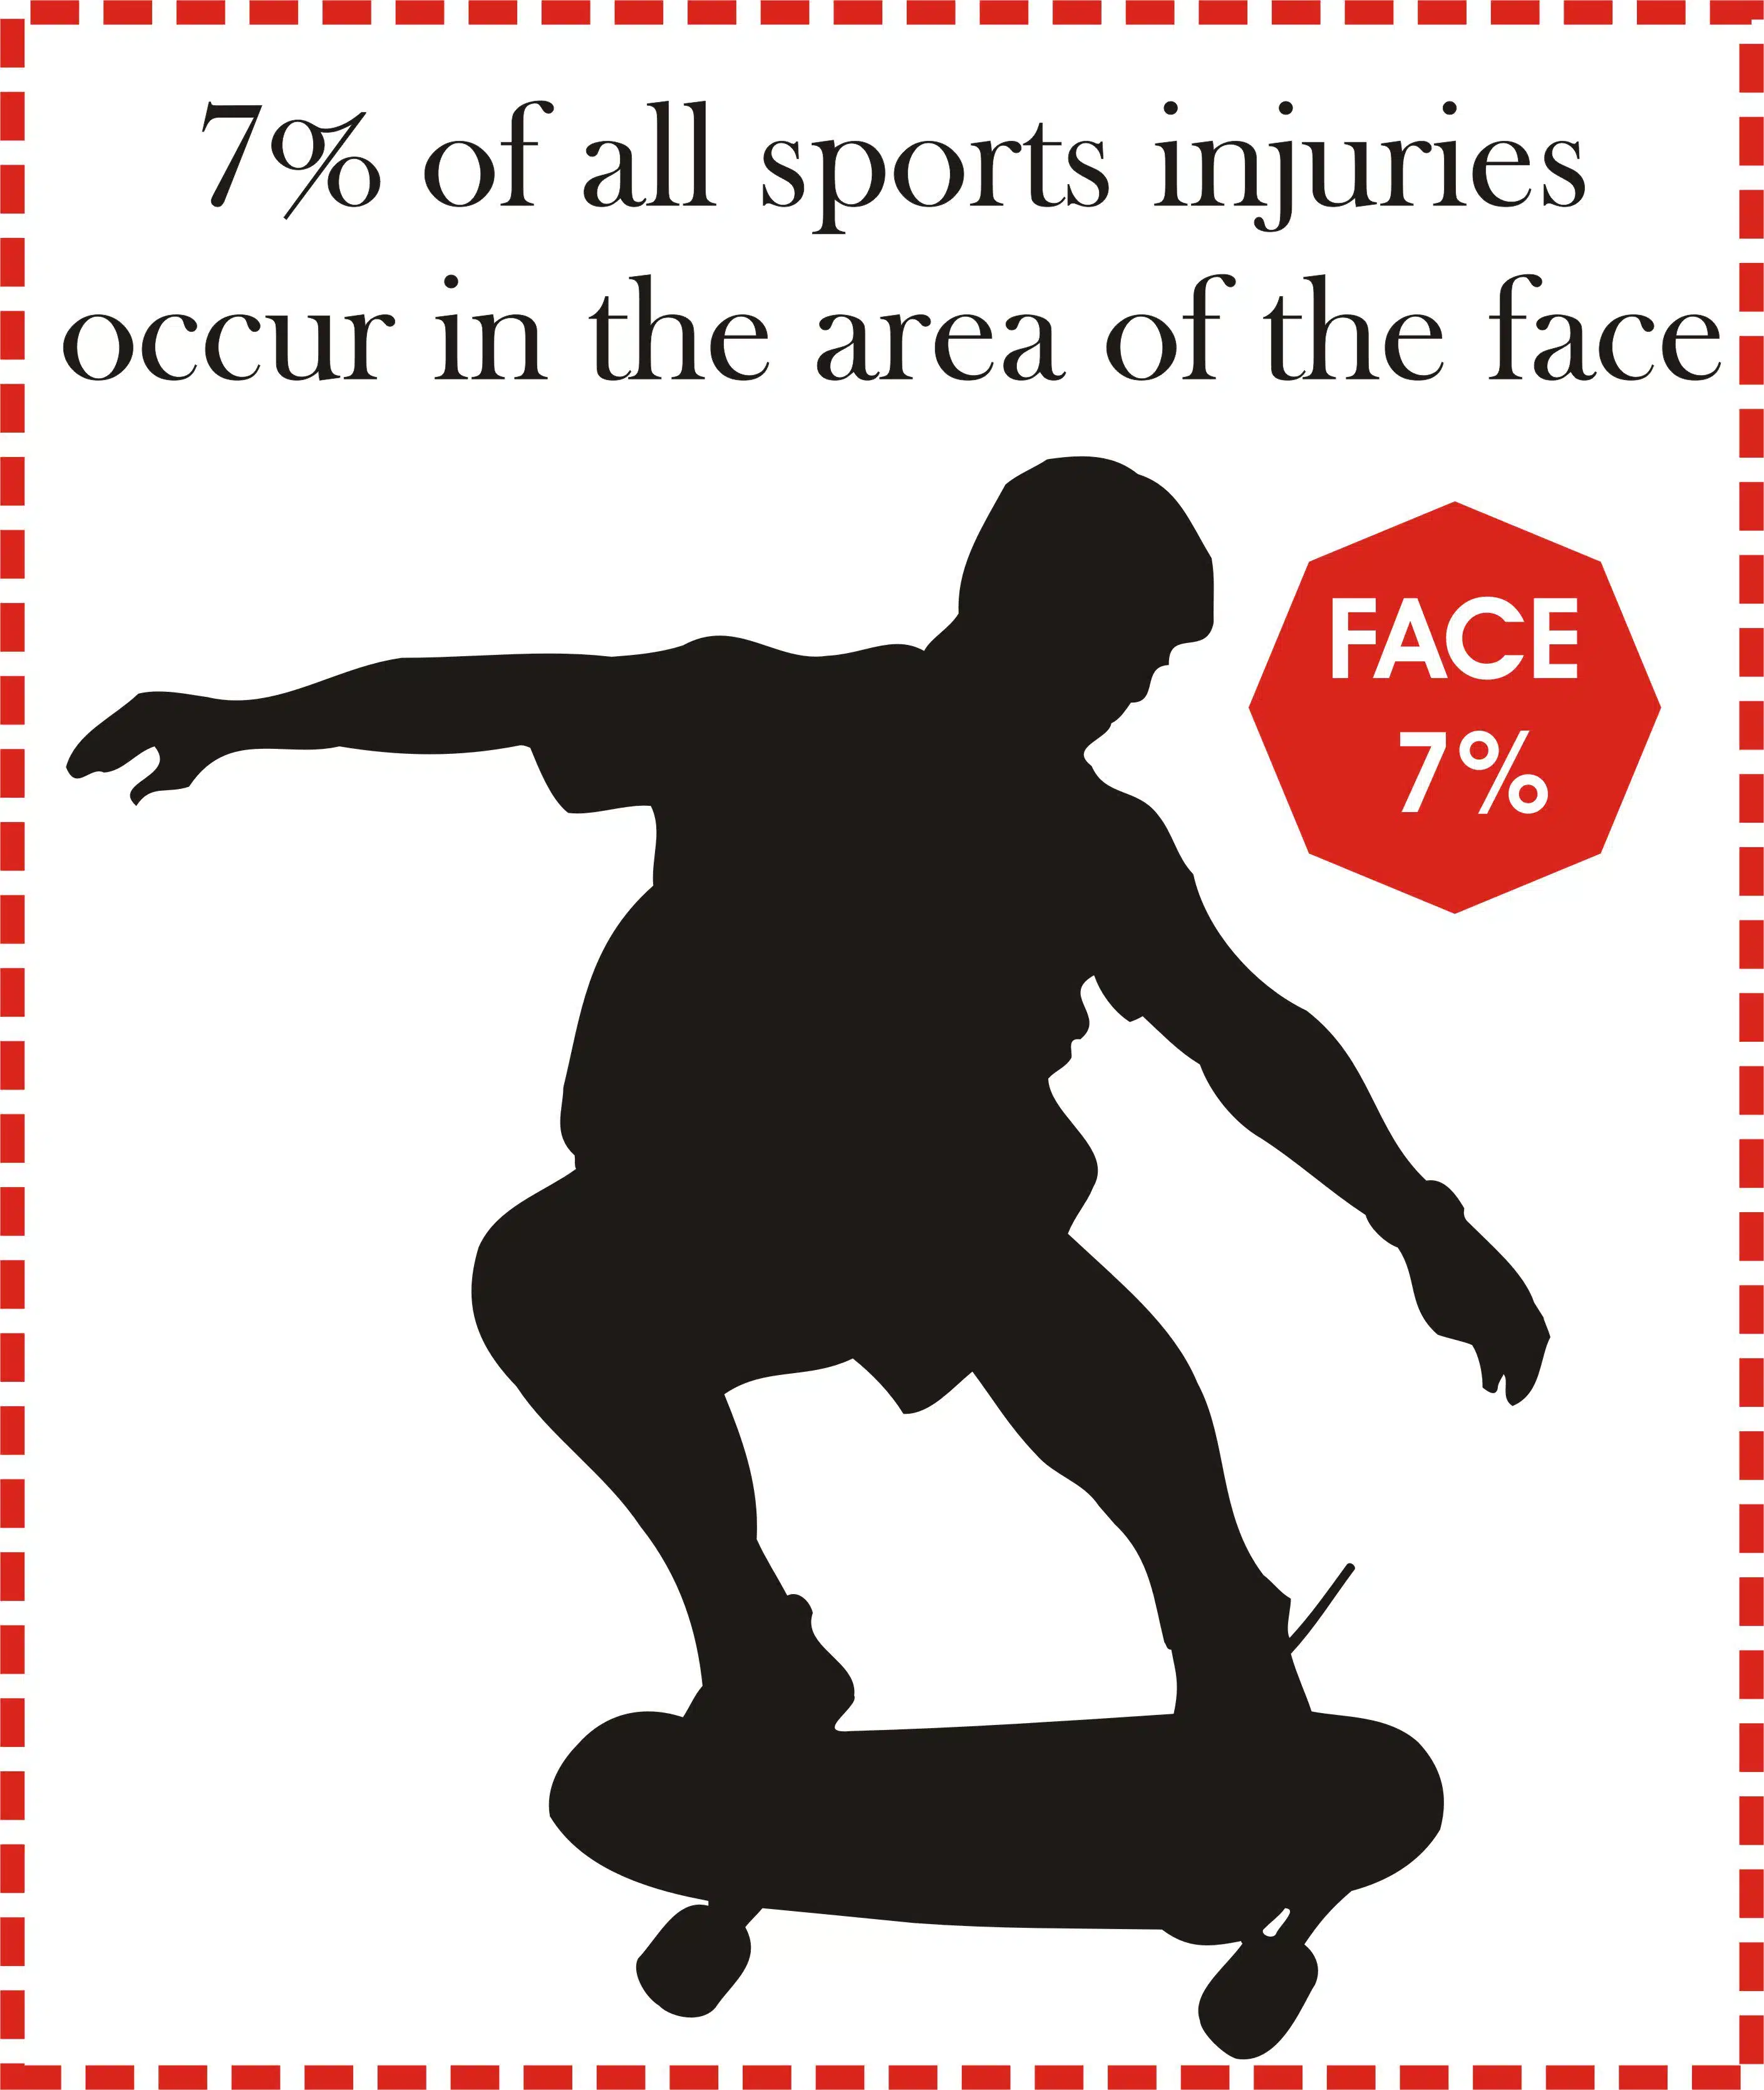 7% of all sports injuries are in the area of the face